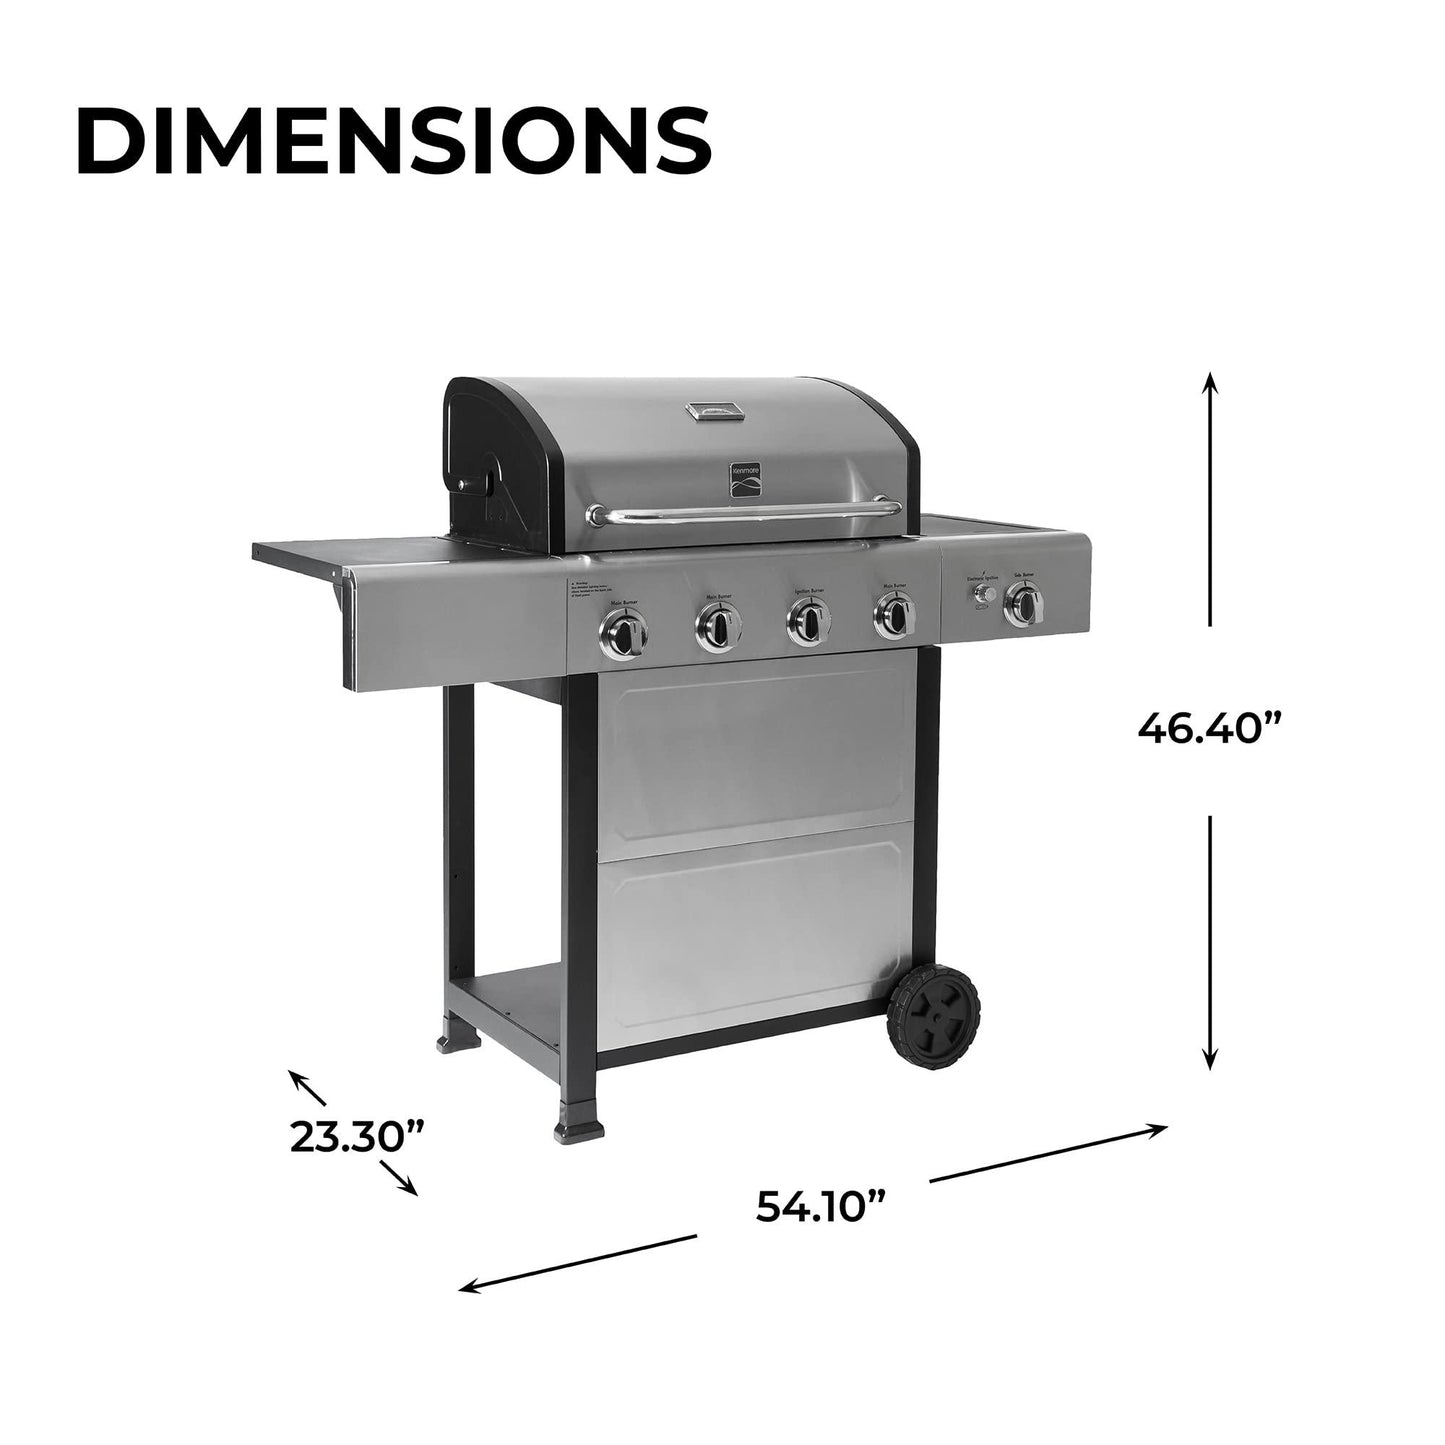 Kenmore 4-Burner Gas Grill with Side Burner, Outdoor BBQ Grill, Propane Gas Grill, Cast Iron Cooking Grates, Electronic Ignition, Warming Rack, Open Cart Design, 53000 BTUs, Stainless Steel - CookCave